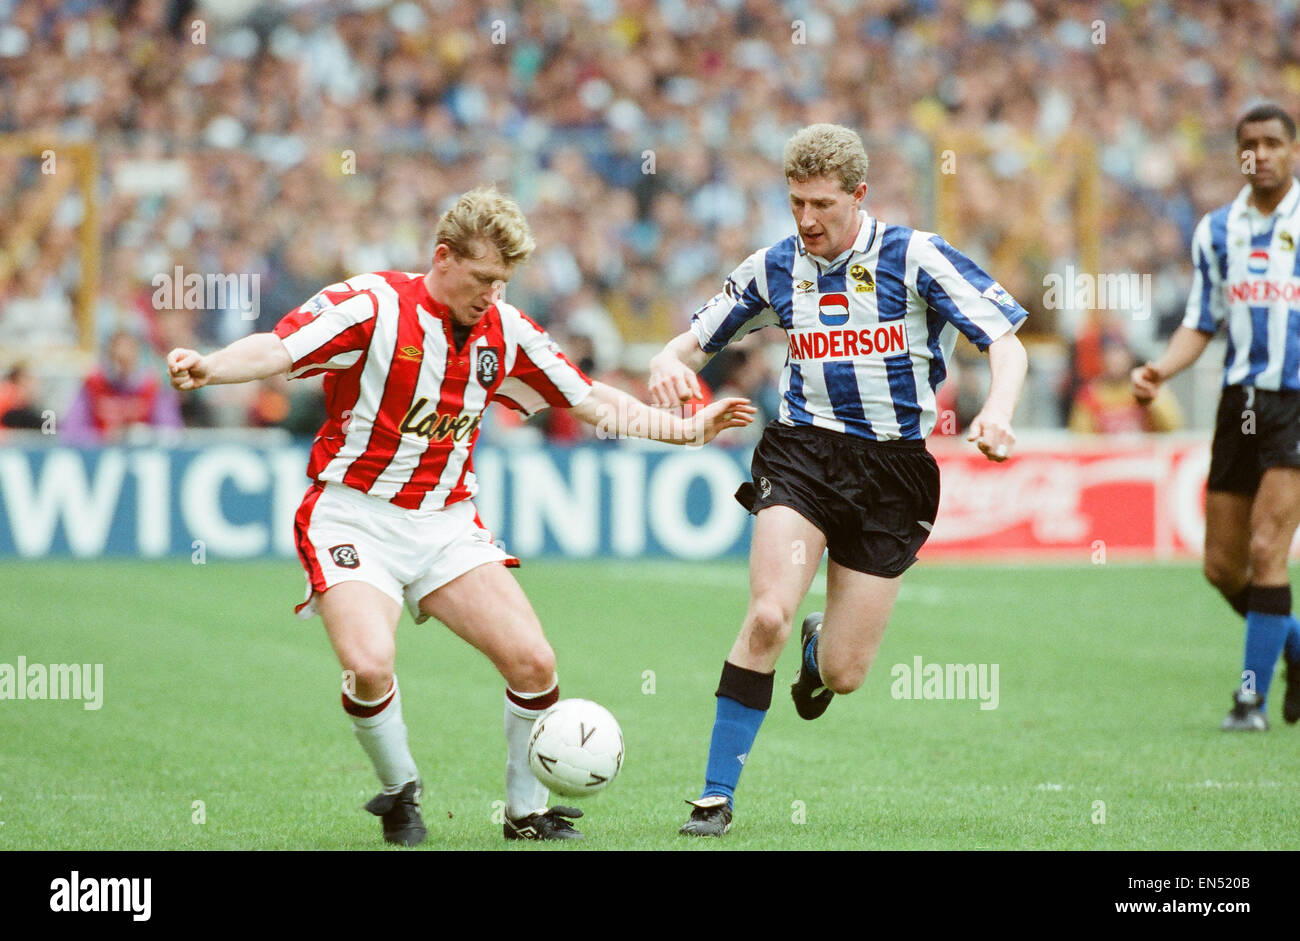 FA Cup Semi Final at Wembley Stadium. Sheffield Wednesday 2 v Sheffield United 1. United's Kevin Gage on the ball watched closely by Nigel Worthington. 3rd April 1993. Stock Photo